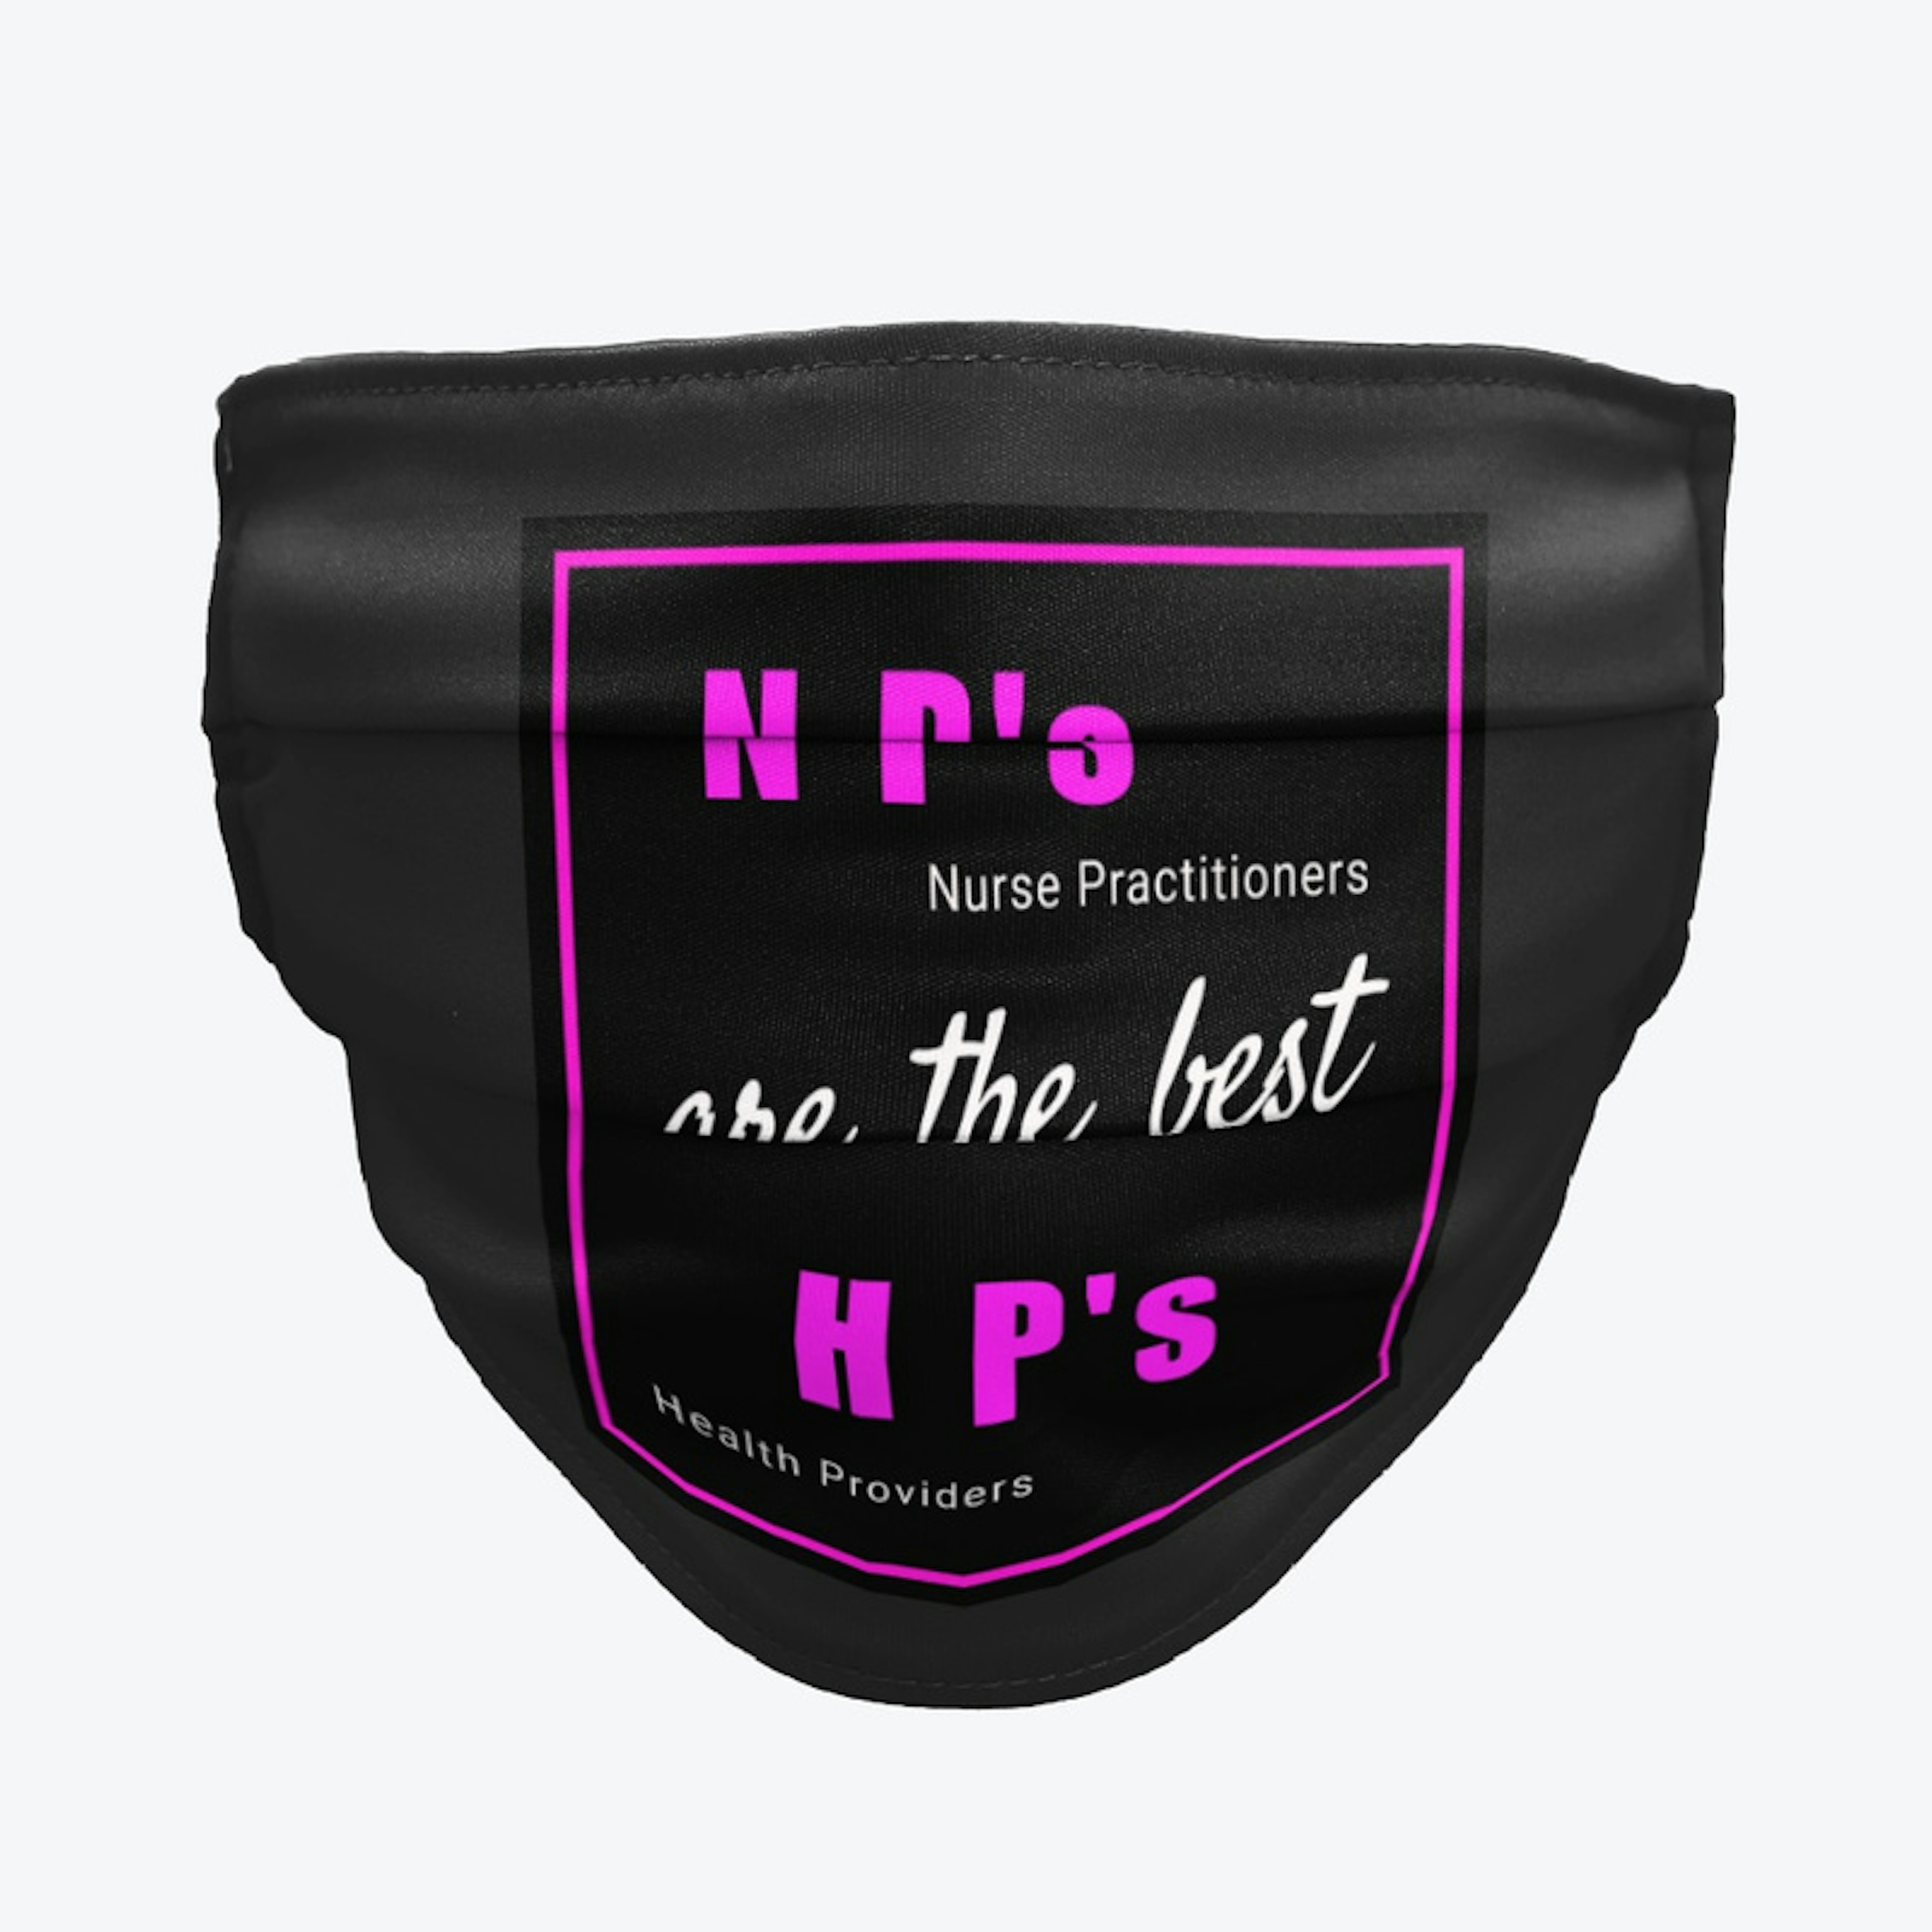 Np's are the best HP's